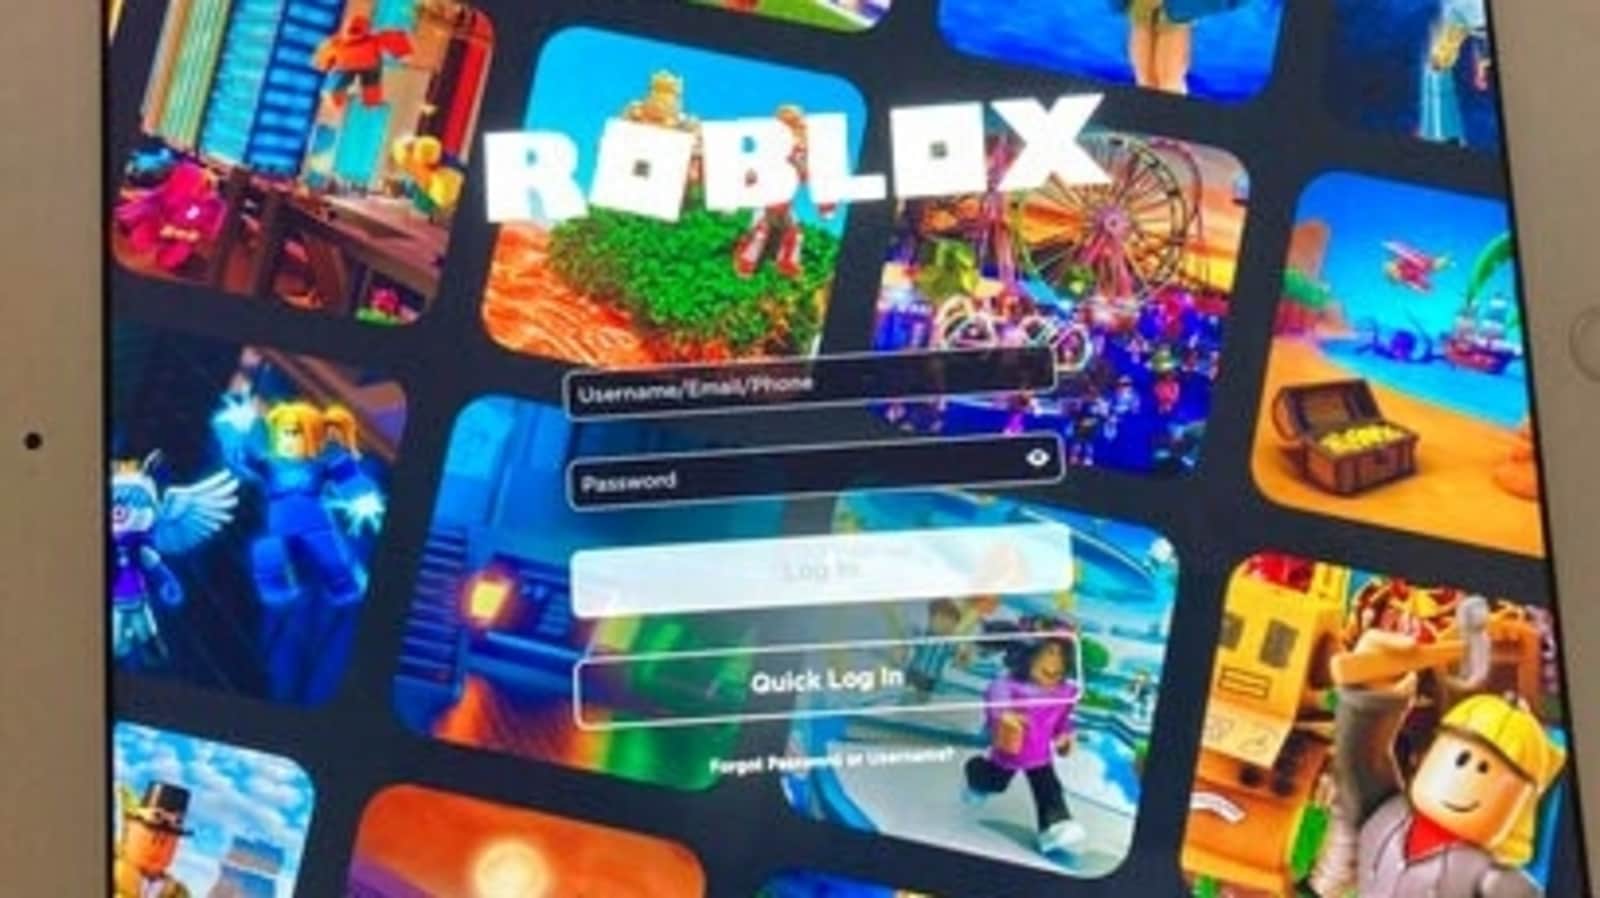 Roblox has tons of games to play online - Newsday